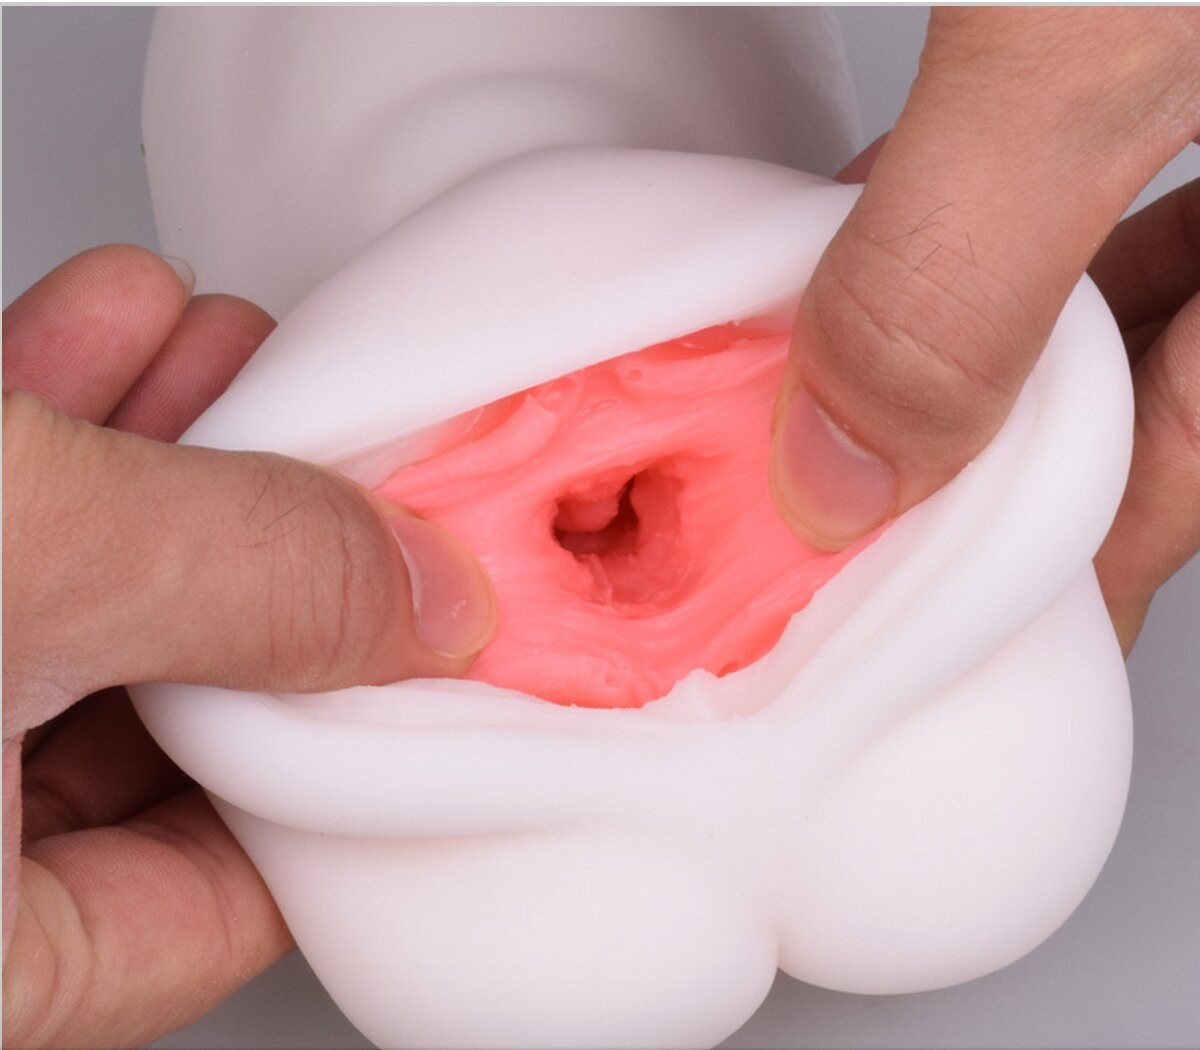 How to make a vagina from silicone (71 photos)